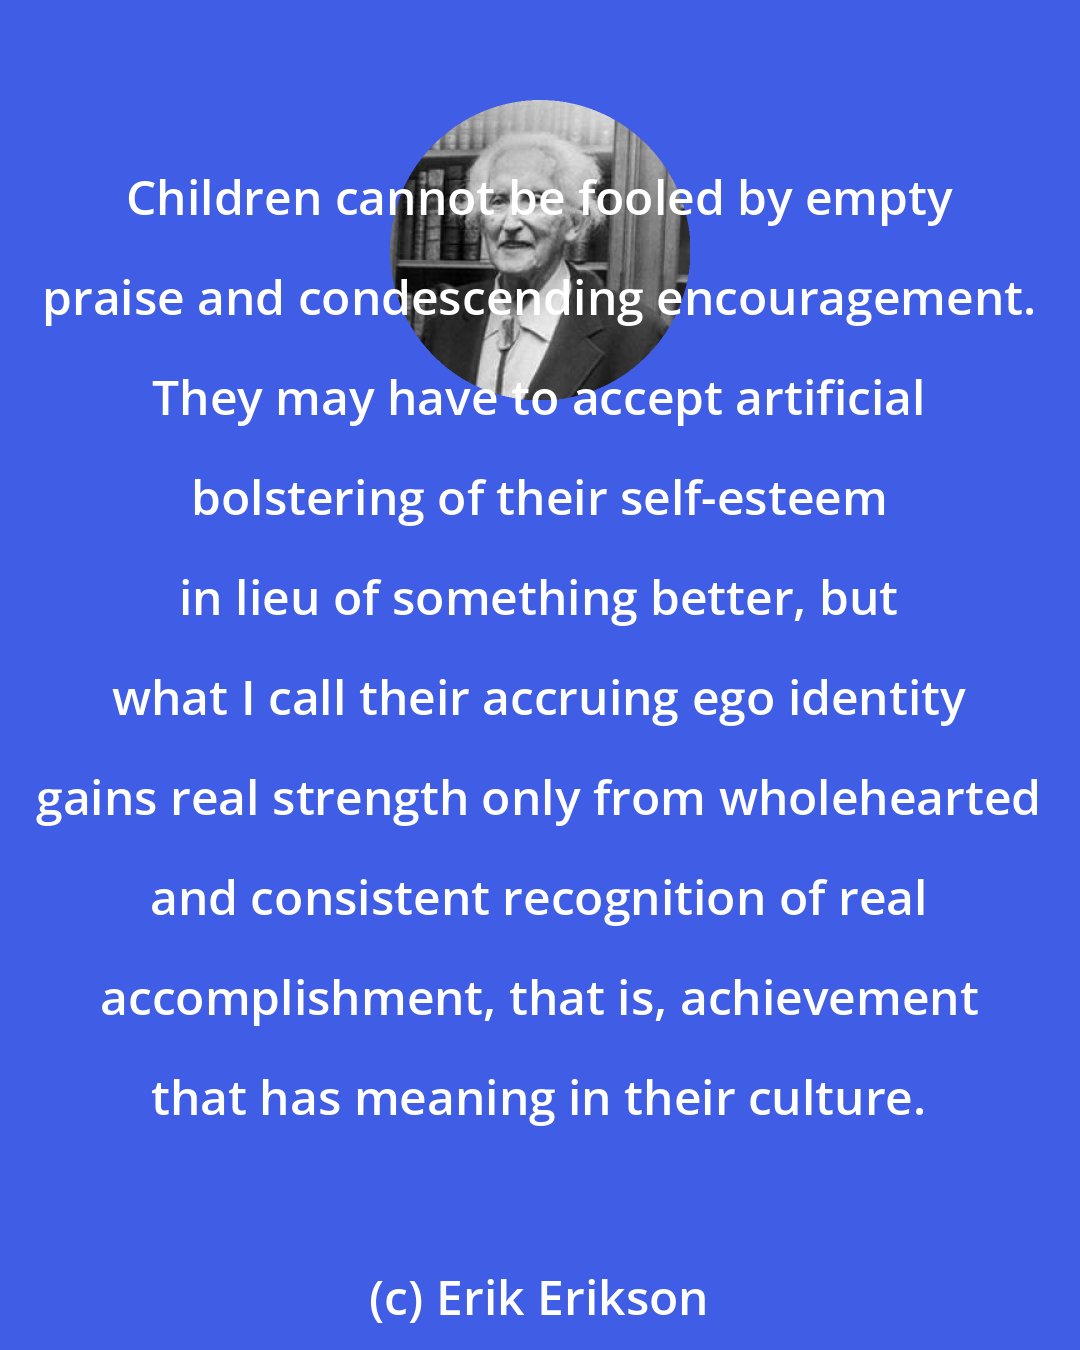 Erik Erikson: Children cannot be fooled by empty praise and condescending encouragement. They may have to accept artificial bolstering of their self-esteem in lieu of something better, but what I call their accruing ego identity gains real strength only from wholehearted and consistent recognition of real accomplishment, that is, achievement that has meaning in their culture.